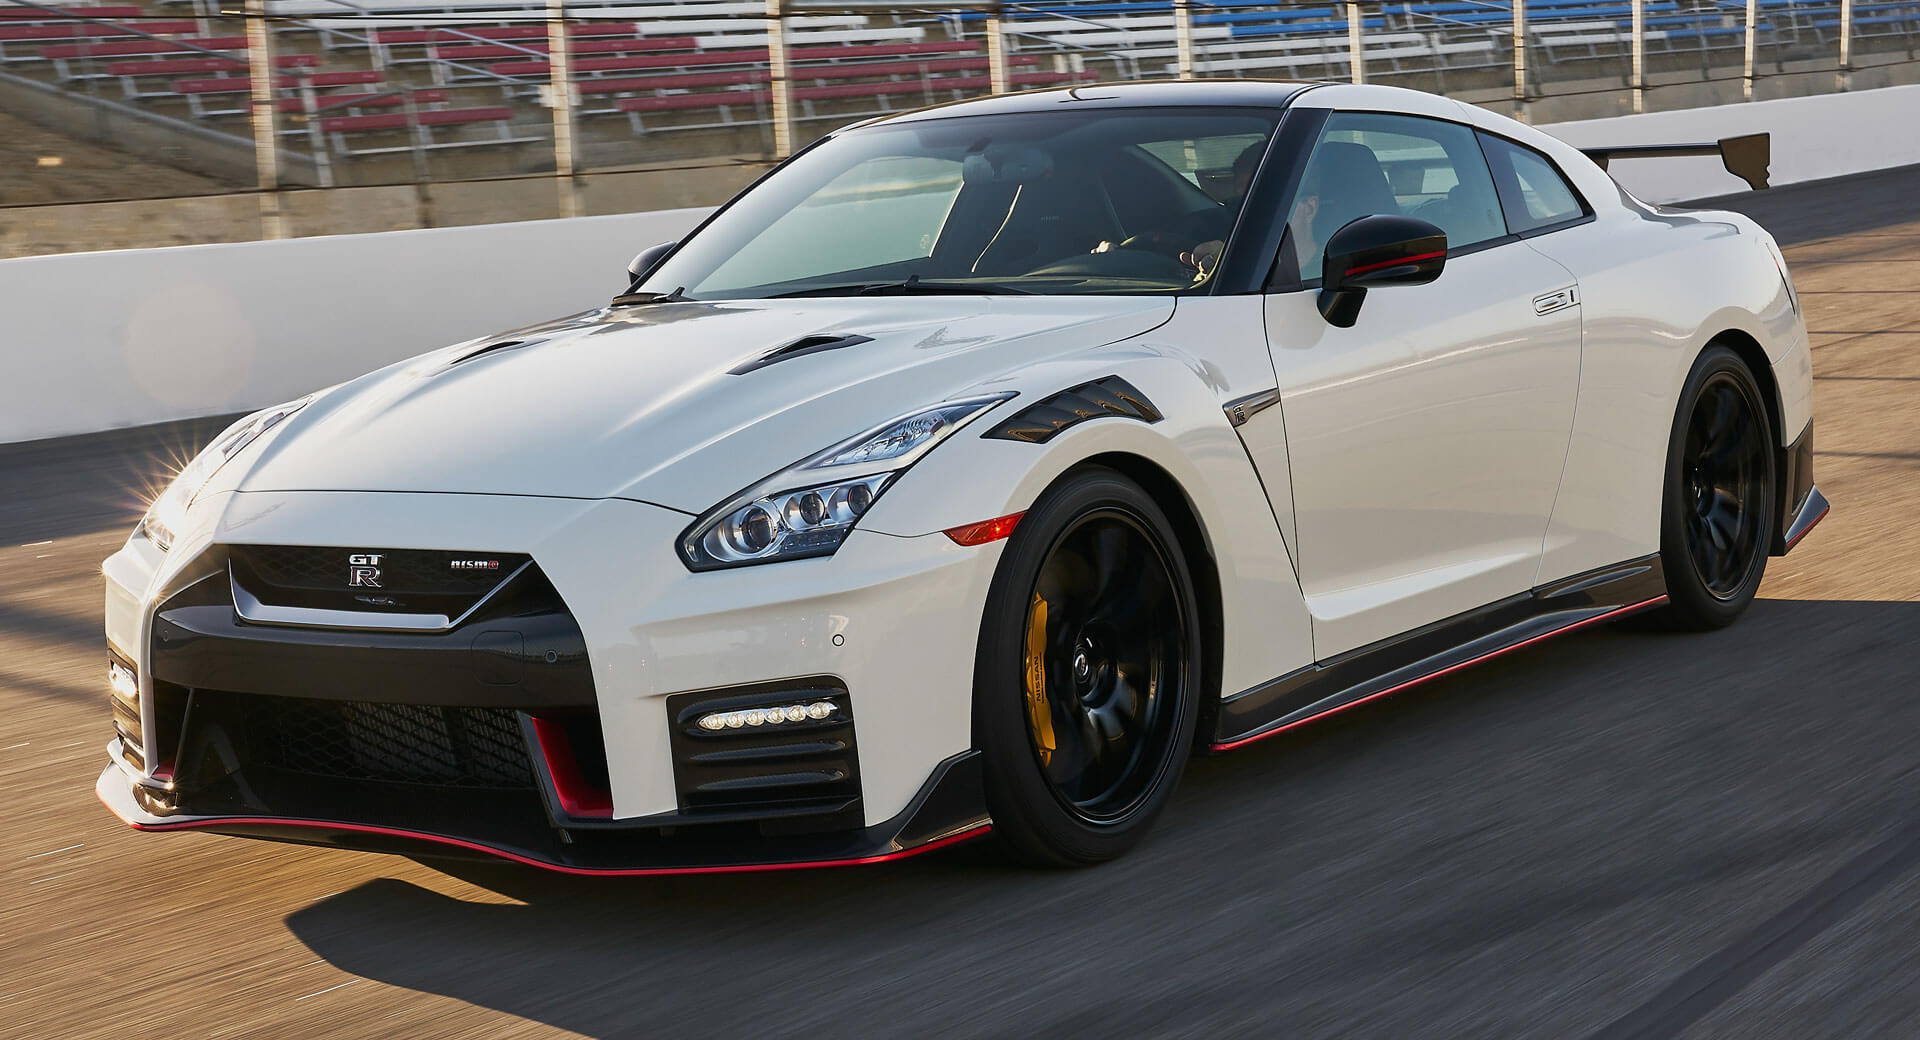 21 Nissan Gt R Priced From 113 540 Nismo Still Costs A Whopping 210 740 Carscoops